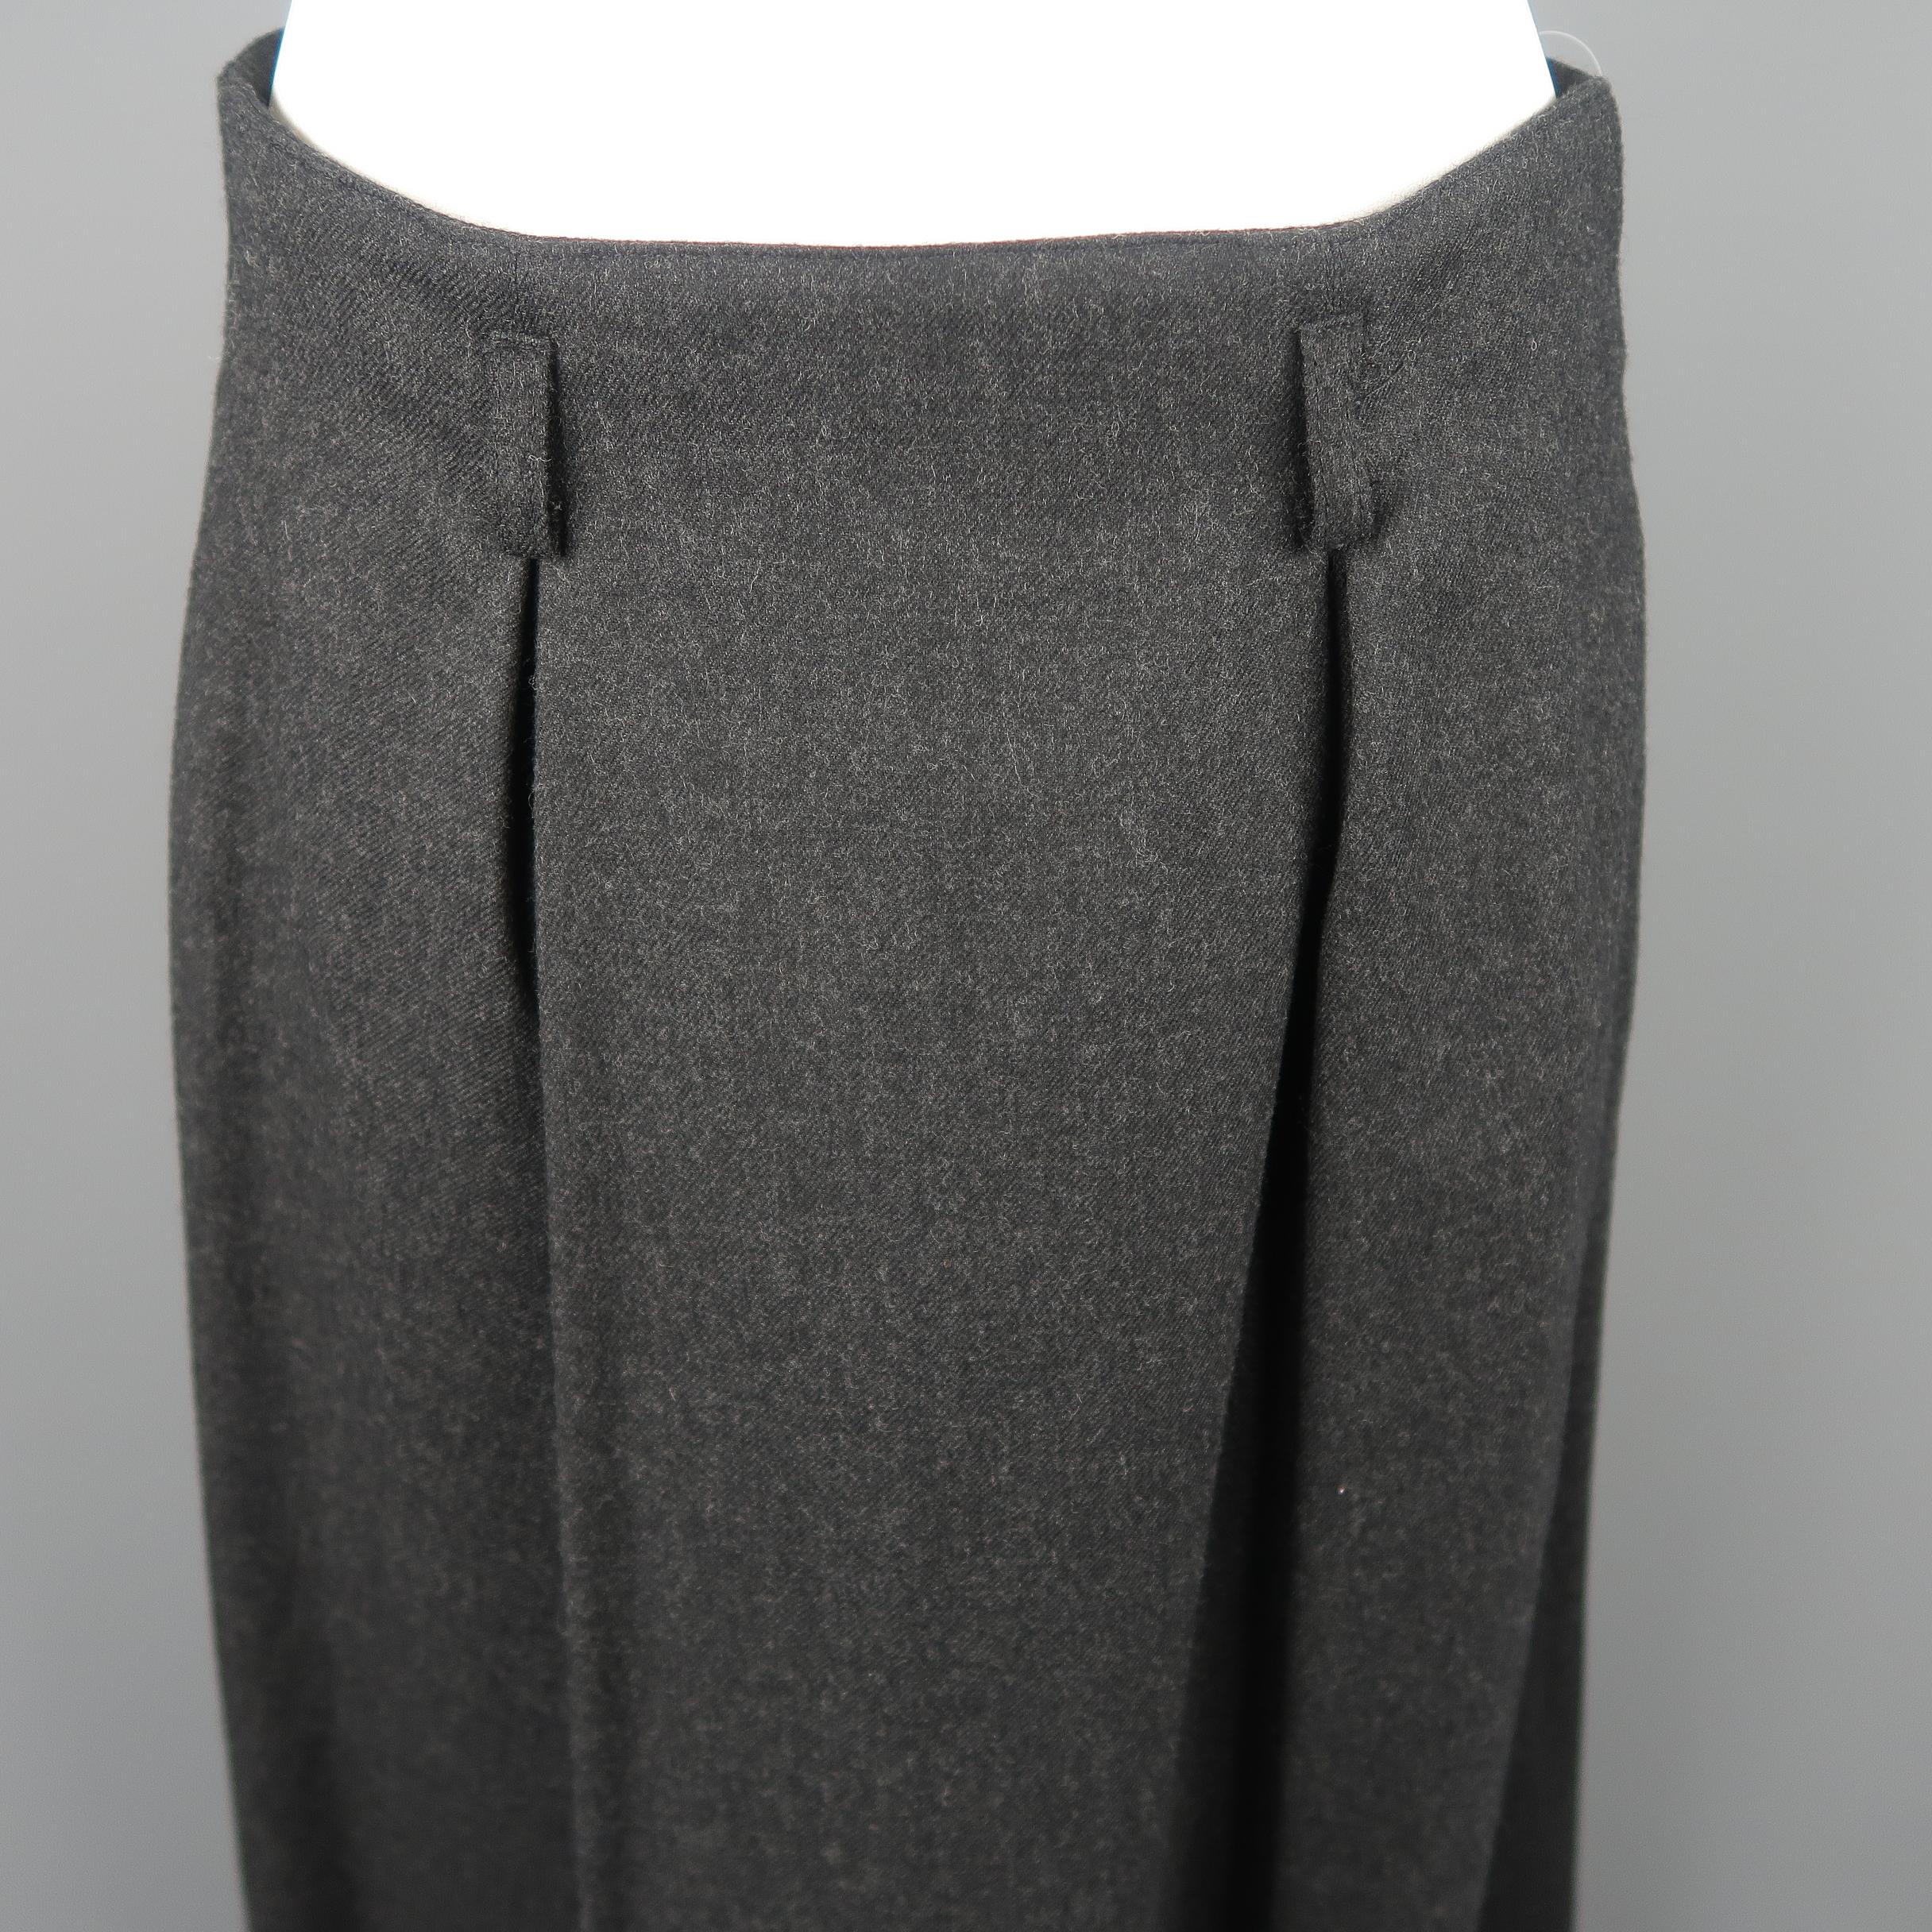 Christian Dior A-line midi skirt, come in wool in charcoal tone, with frontal pleats, pockets and zipper on the back. Made in USA.
 
Excellent Pre-Owned Condition.
Marked: US 8
 
Measurements:
 
Waist: 29 in.
Hip: 44 in.
Length: 33.5 in.